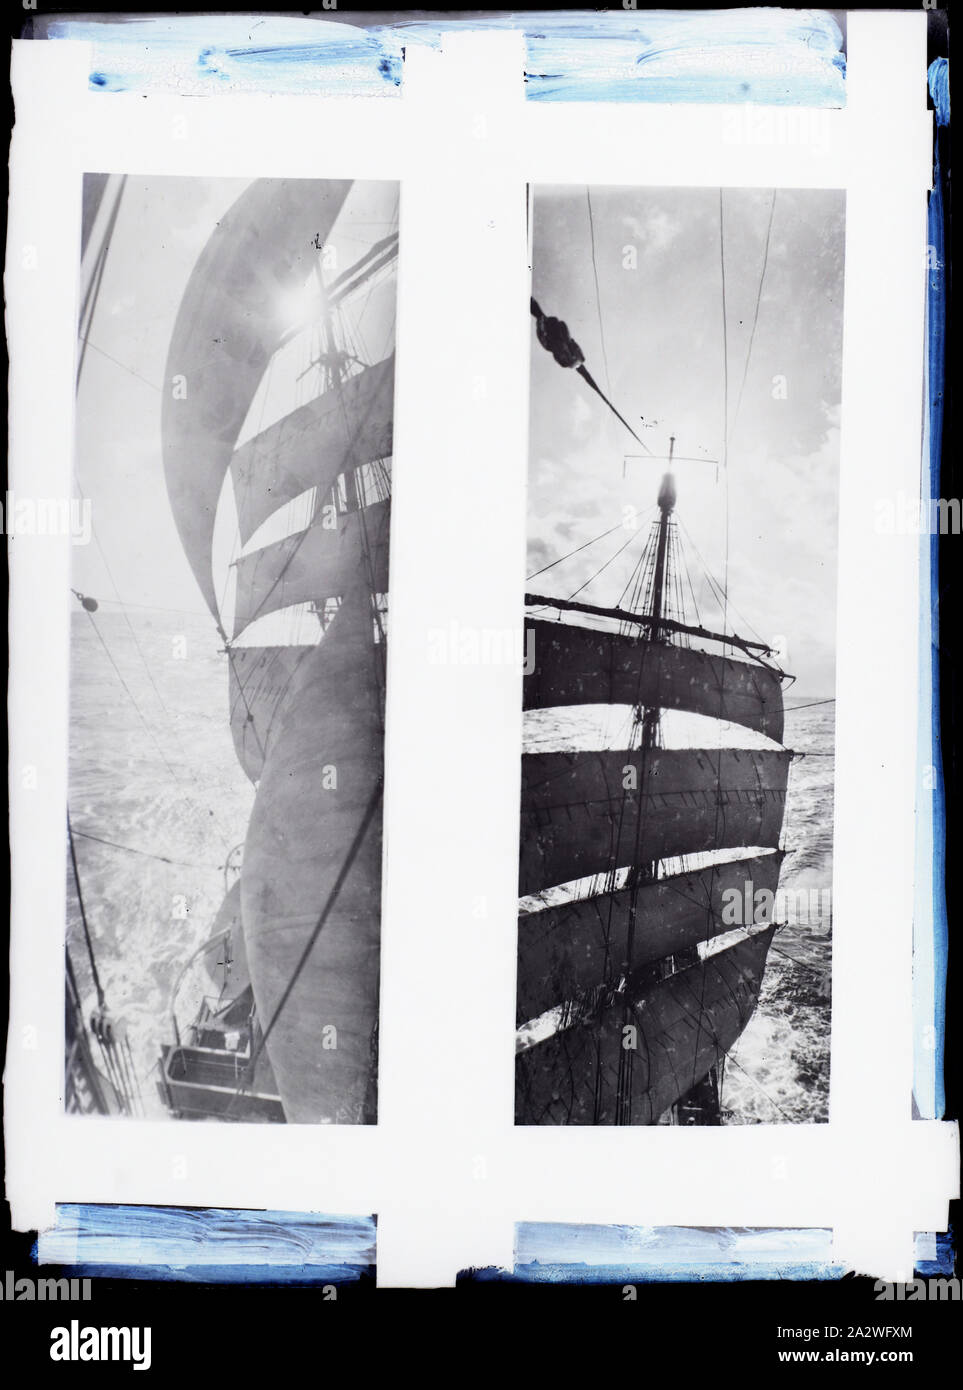 Glass Negative -Two Views of the Discovery's Sail Settings, BANZARE Voyage 1, Antarctica, 1929-1930, One of 328 images in various formats including artworks, photographs, glass negatives and lantern slides Stock Photo